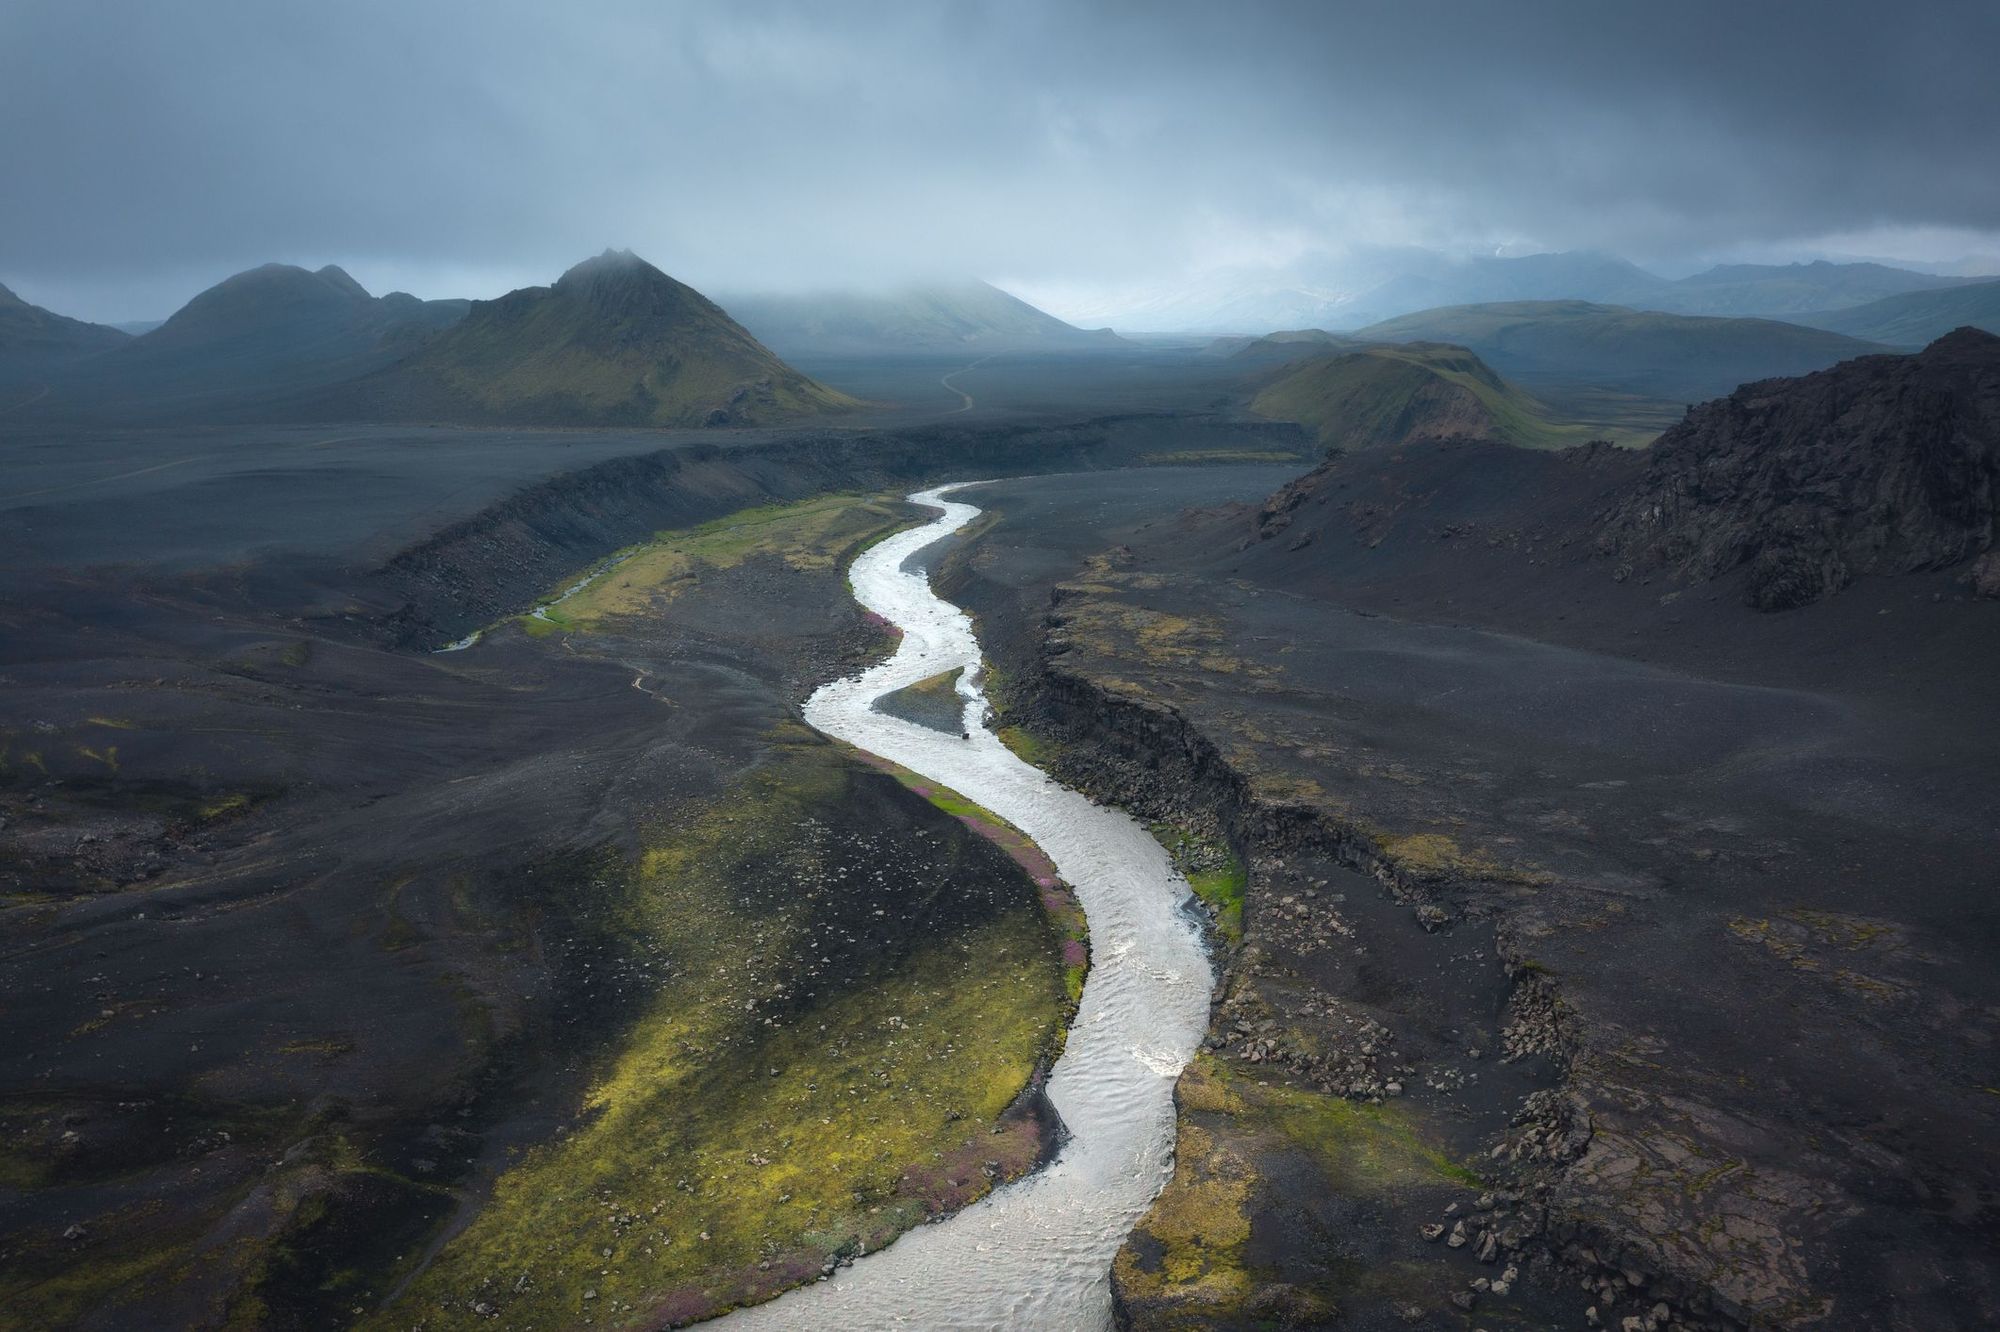 A river carving through black lava fields on the Laugavegur Trail in Iceland shows